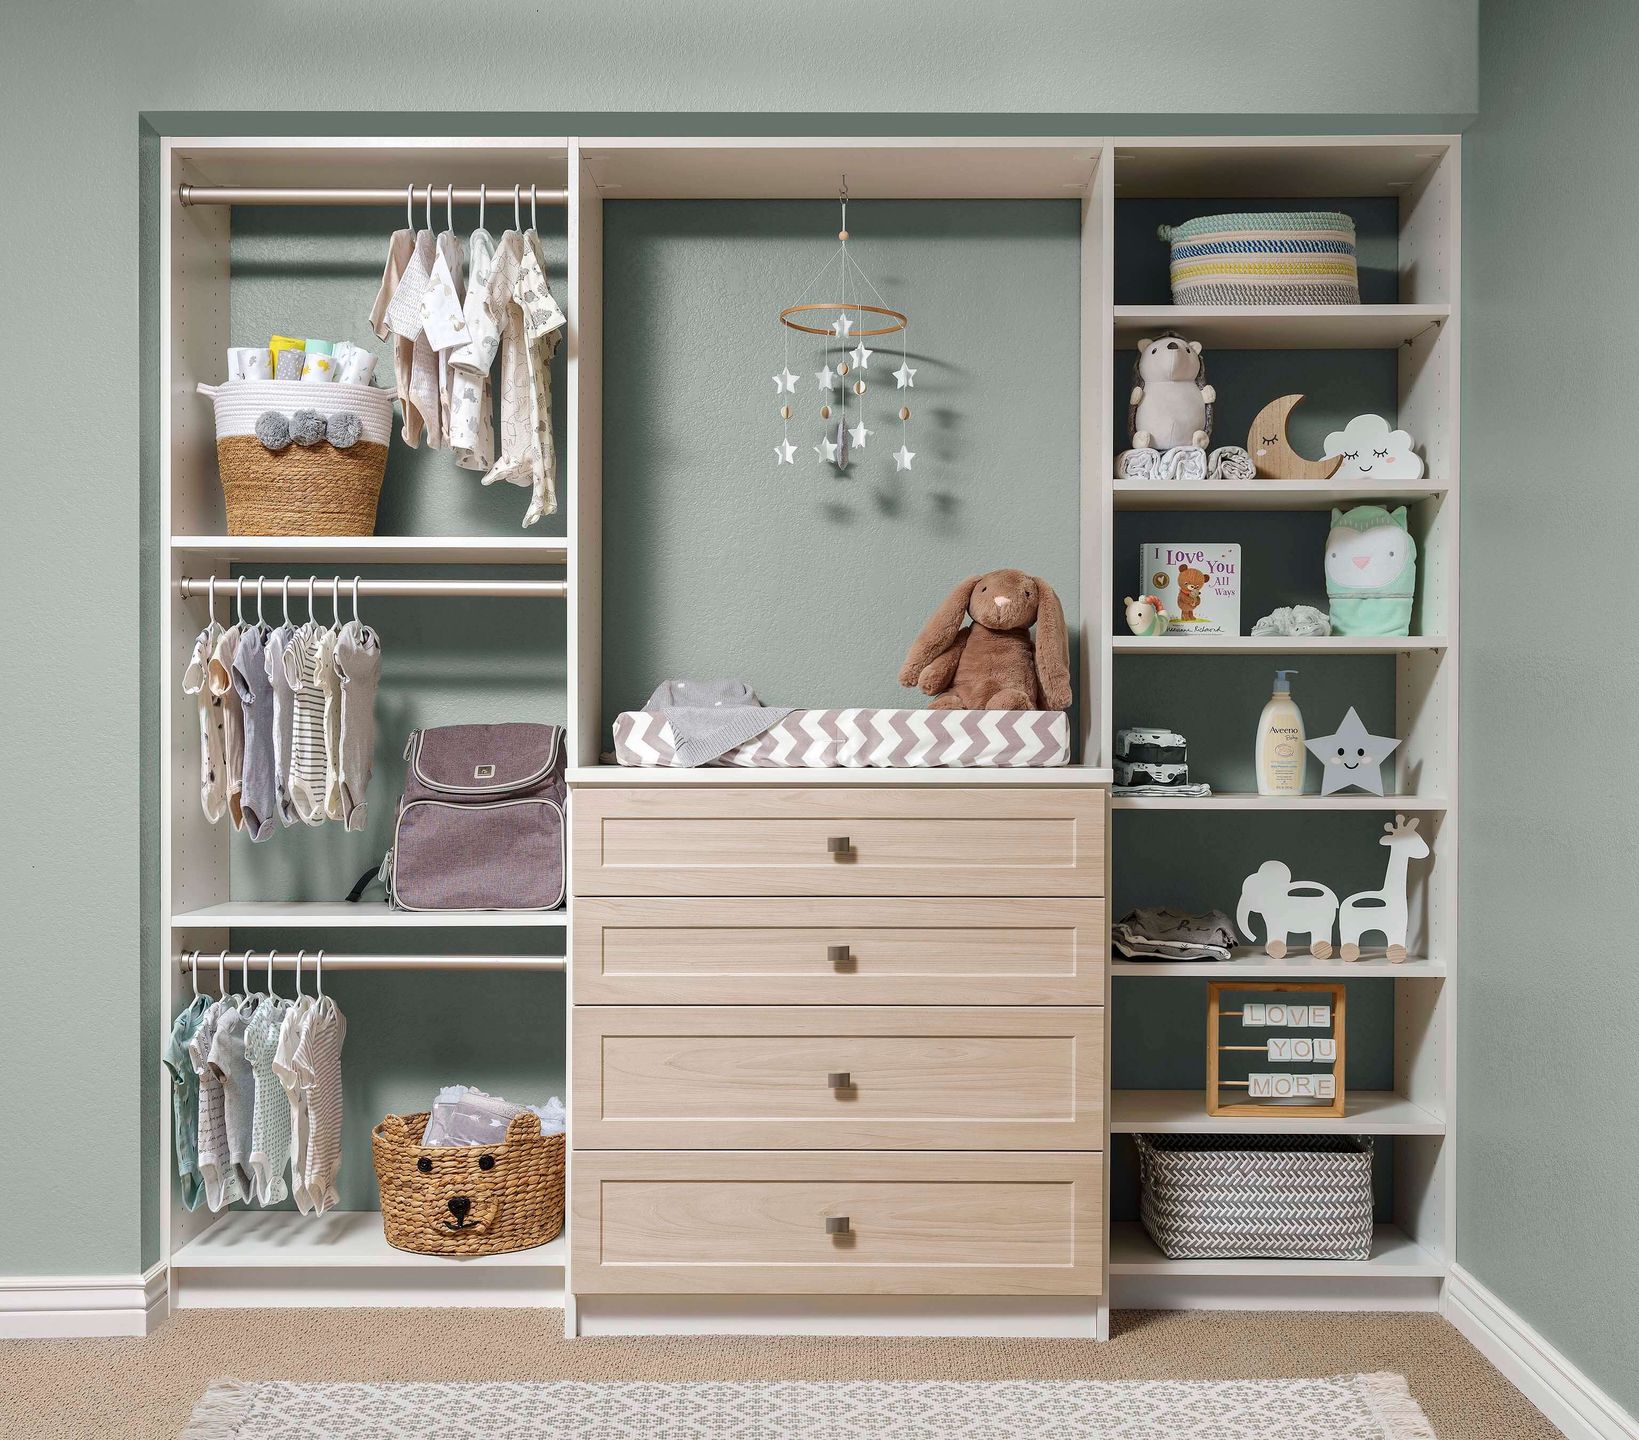 White and Fawn One-Piece Shaker Nusery Closet Jul 2020.jpg